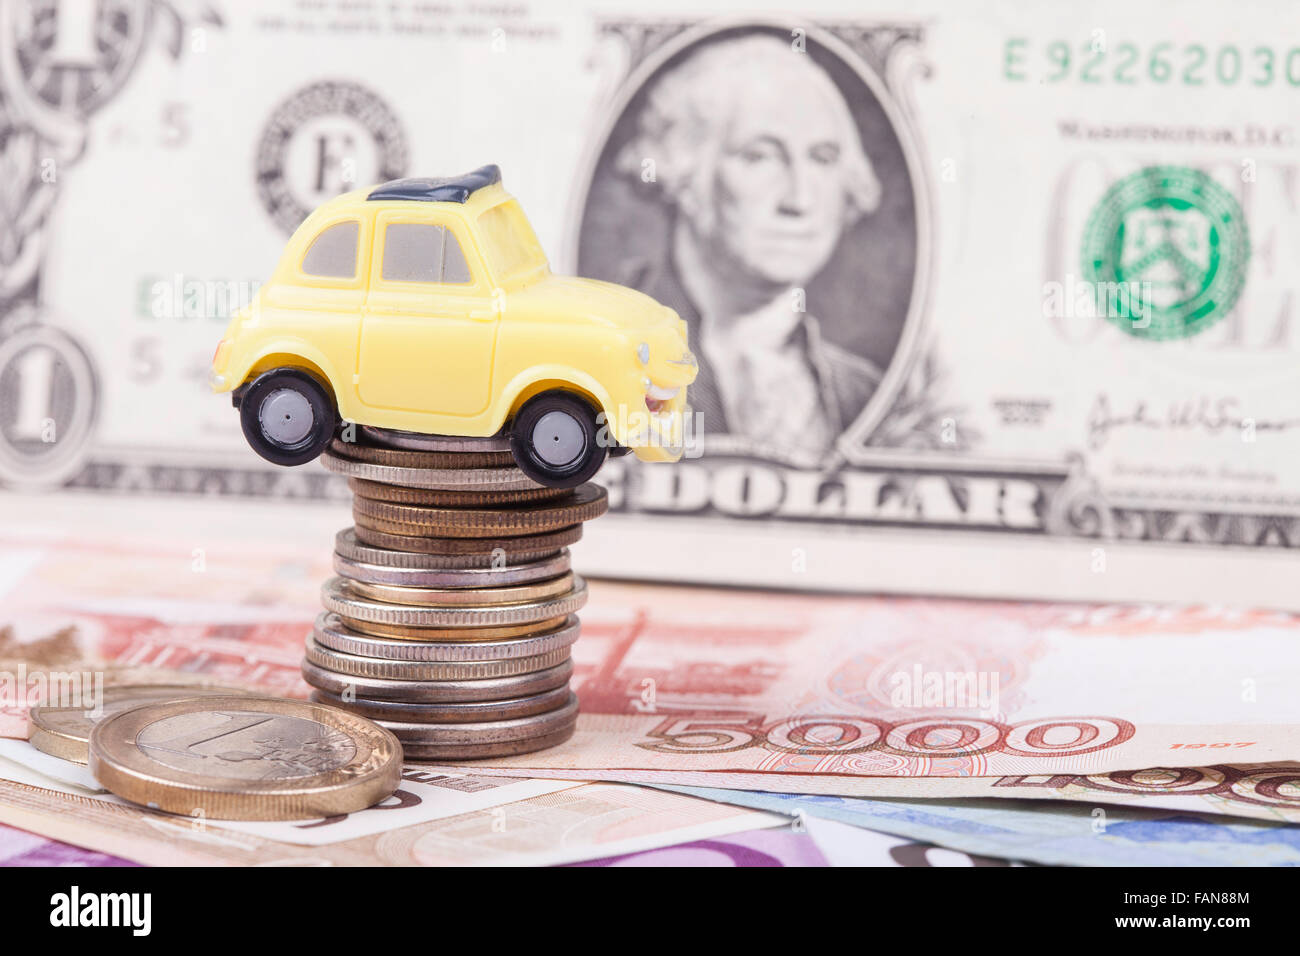 toy car and money: dollars, rubles closeup Stock Photo